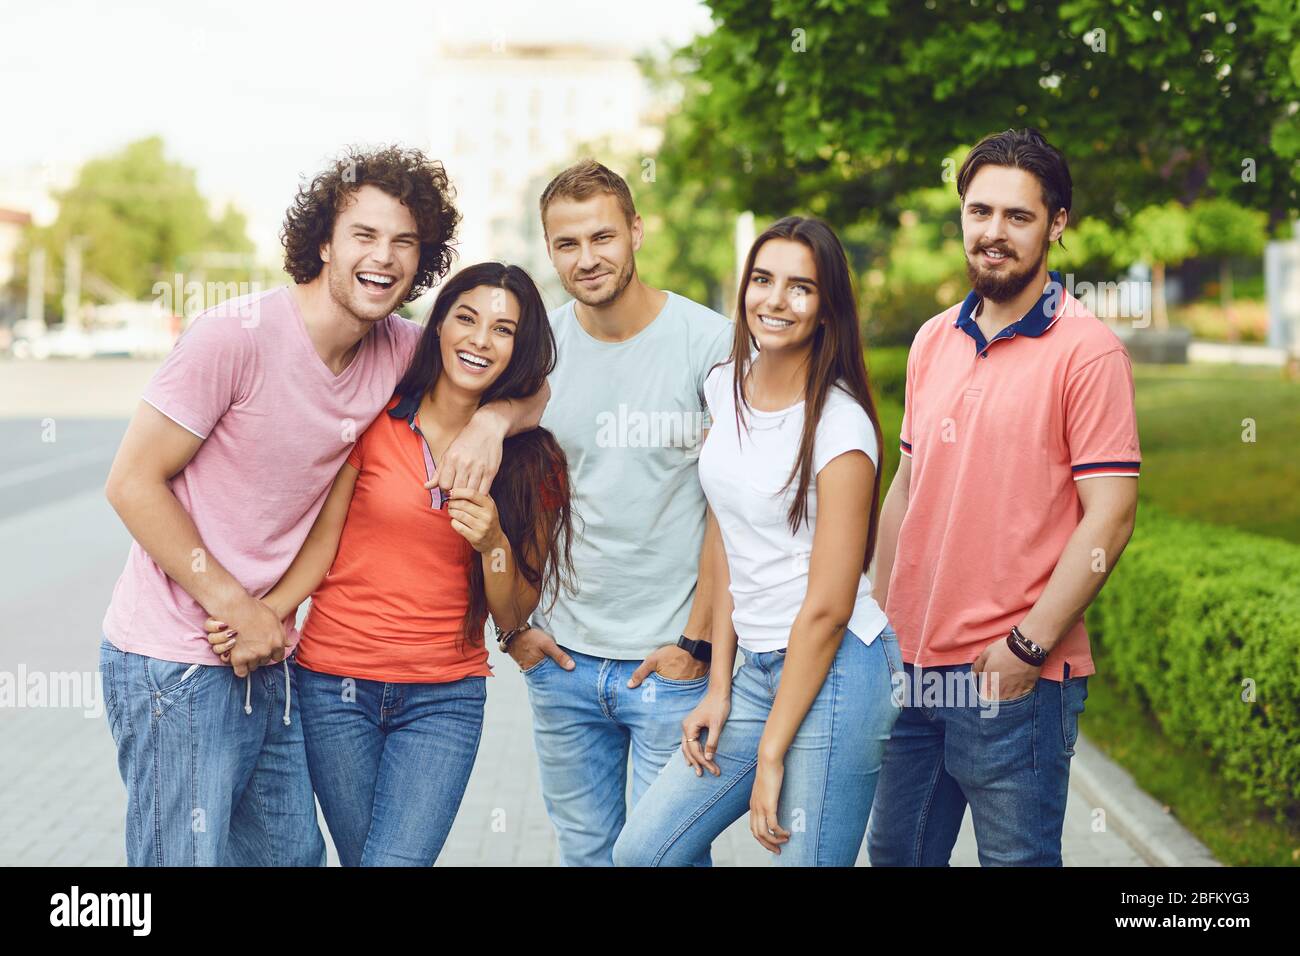 Group of people smiling on a city street in summer. Stock Photo